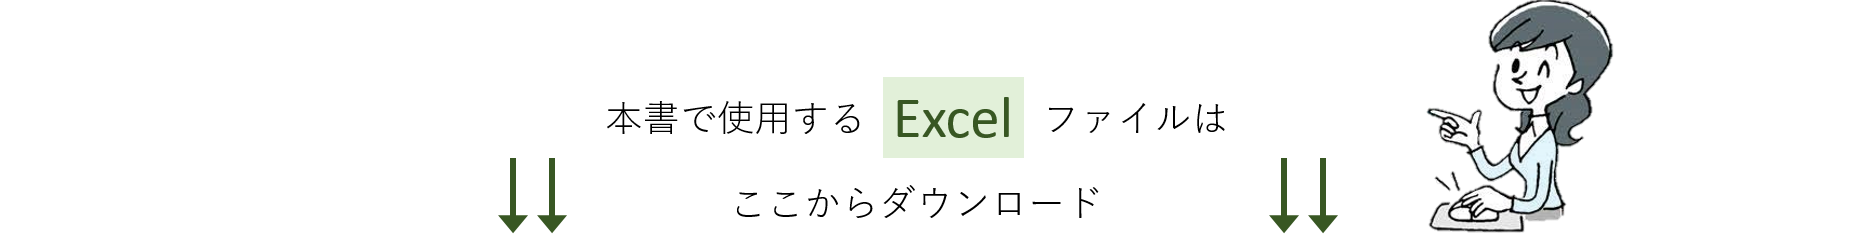 Excelボタン14.png